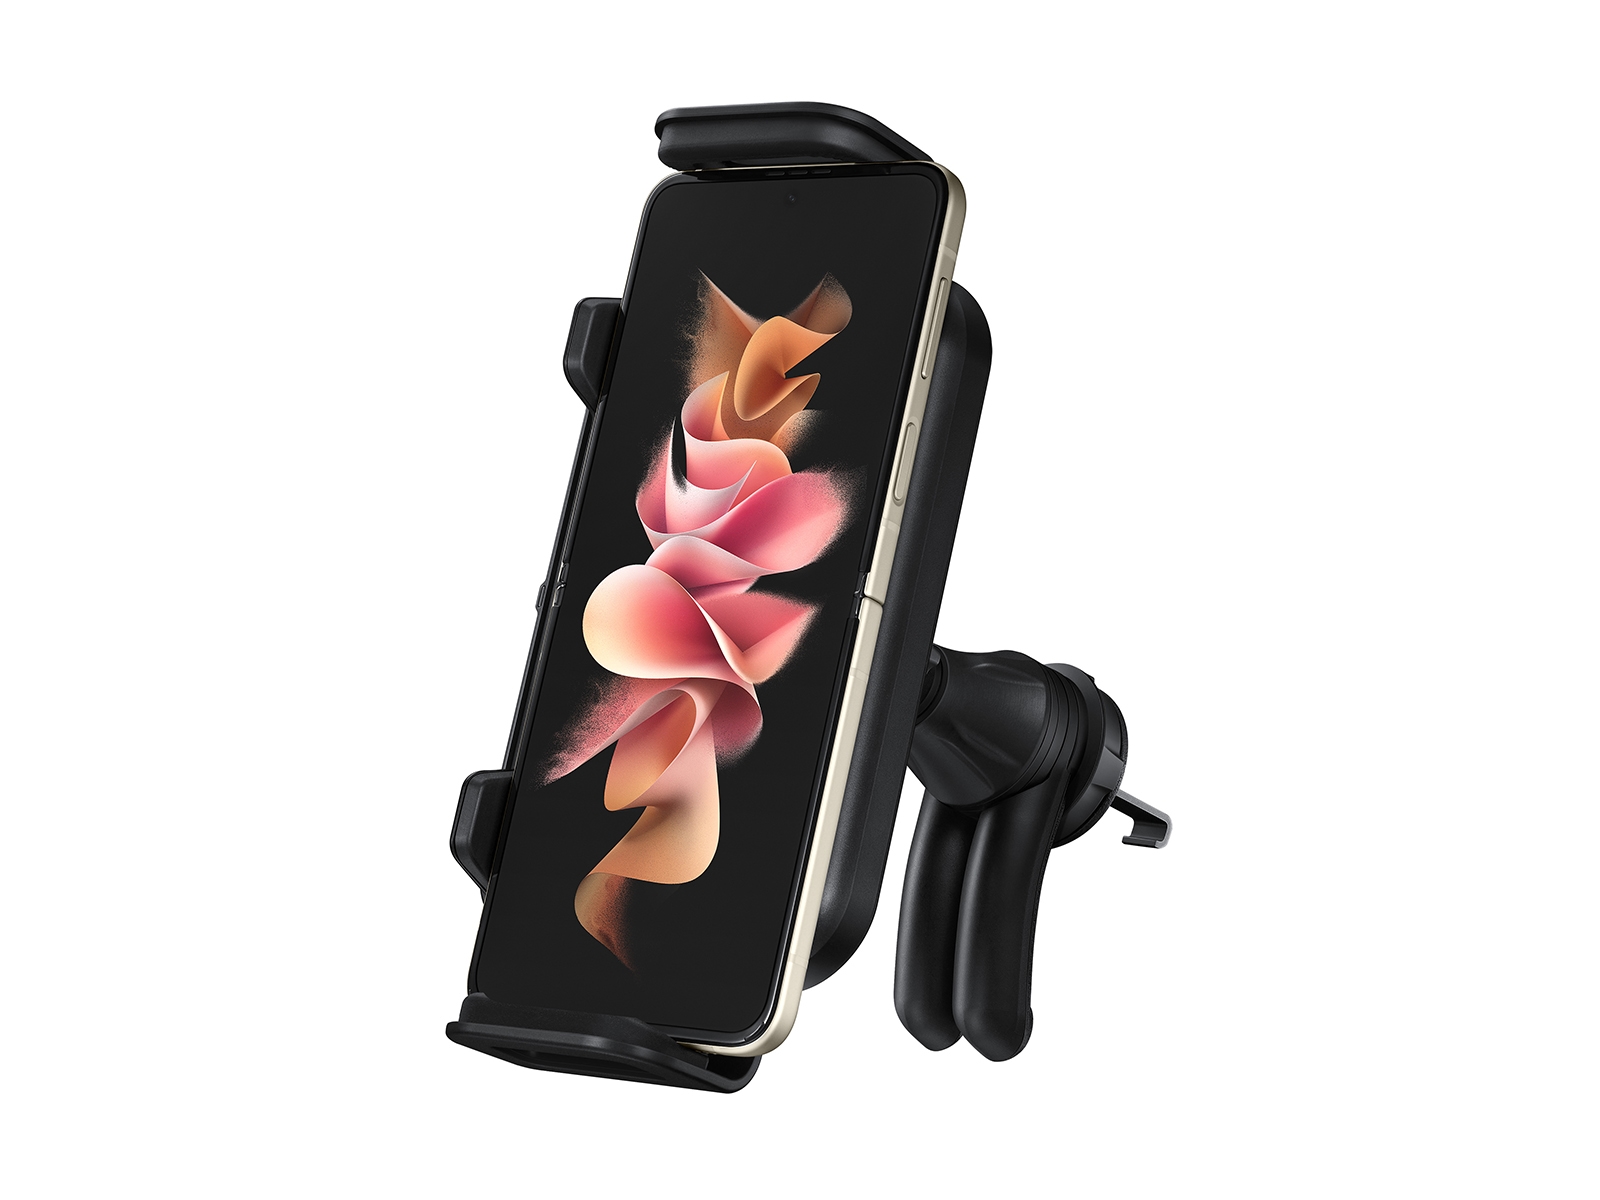 Blackcat Wireless Car Mobile charger with Holder, Fastest Wirelss